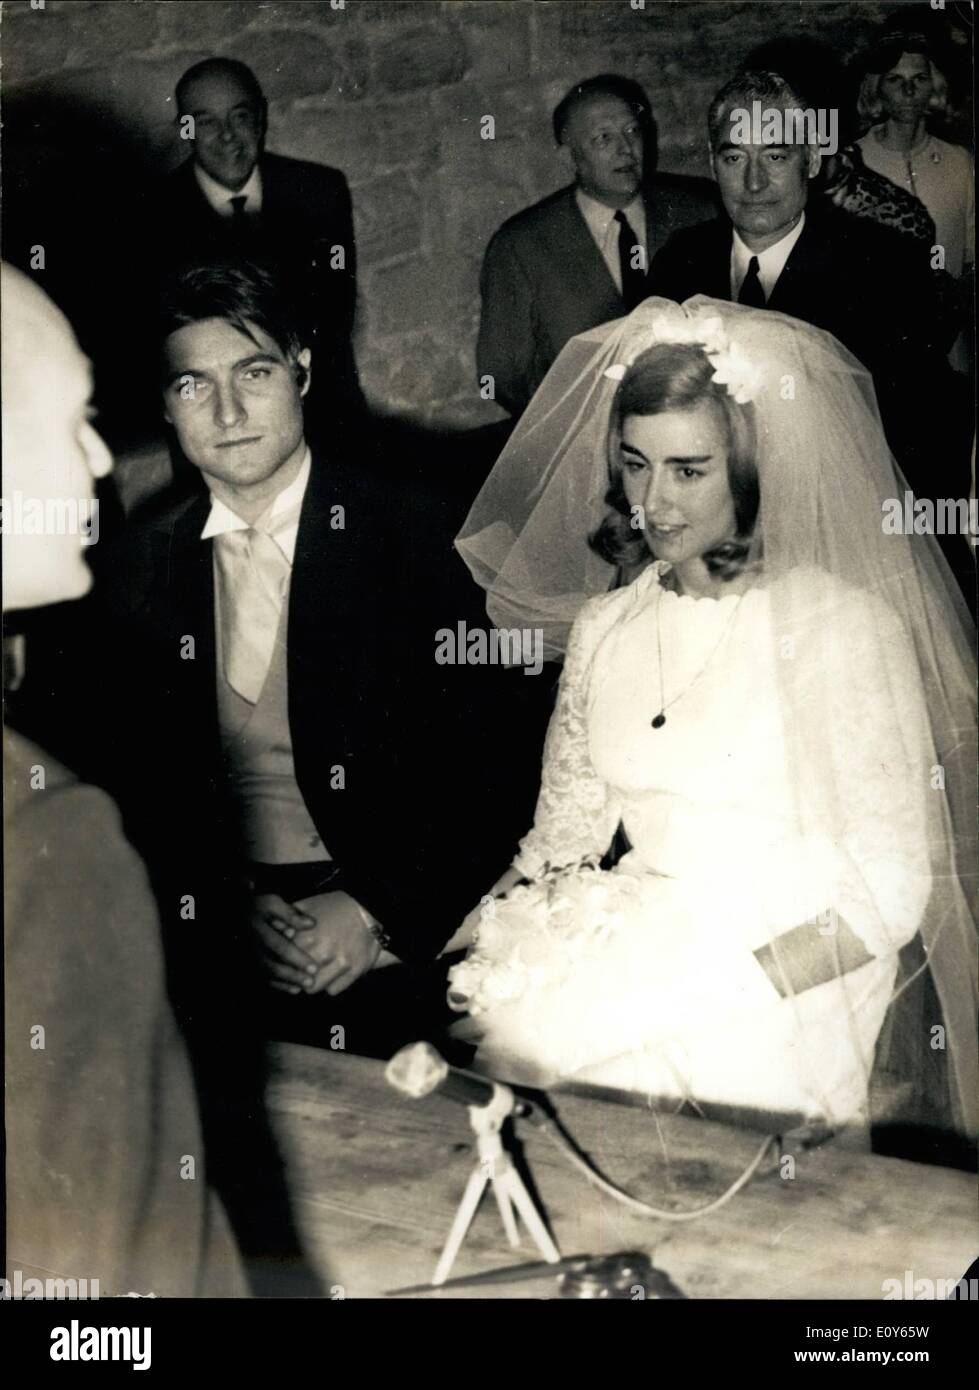 Mar. 03, 1969 - Famous Swimmer Weds: Danielle Dorleans, one of the top French girl swimmers, was married to Jacques Dimont, Fencing Champion, Olympic gold medal. In Marseilles yesterday. Her Twin sister, Monique, was married at the Same time to Francois Jeanne, member of the Fencing team. photo shows Danielle Dorleans and Jacques Dimont Pictured during the civil wedding atmarseilles yesterday Stock Photo